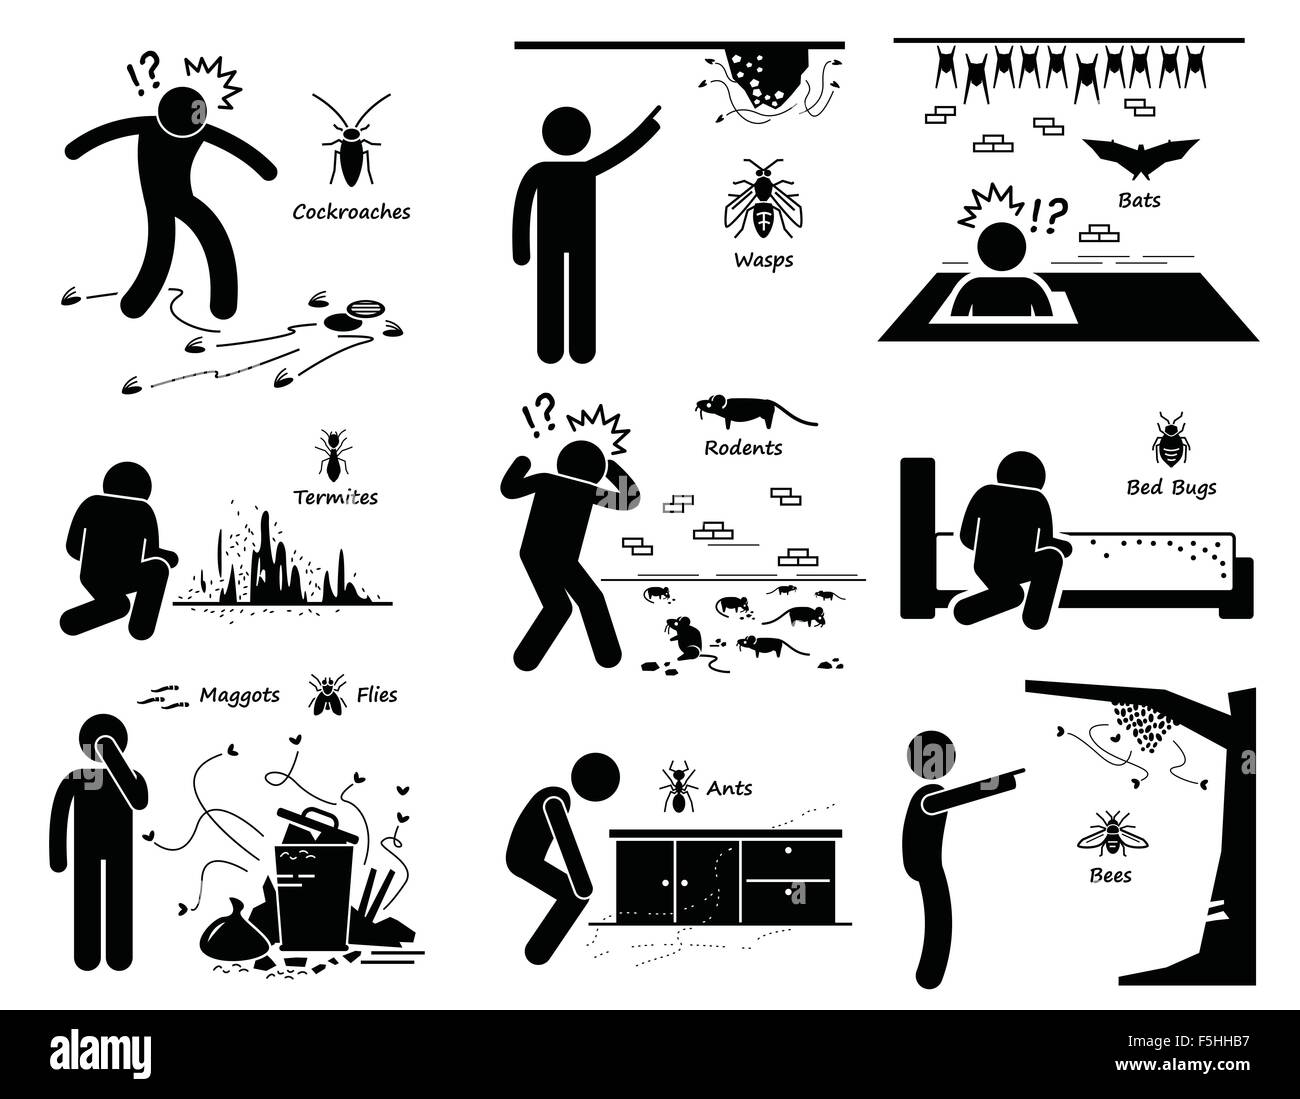 Infestation of Pests Cockroaches Wasp Bats Termites Rats Bugs Maggots Ants Bees Stock Vector